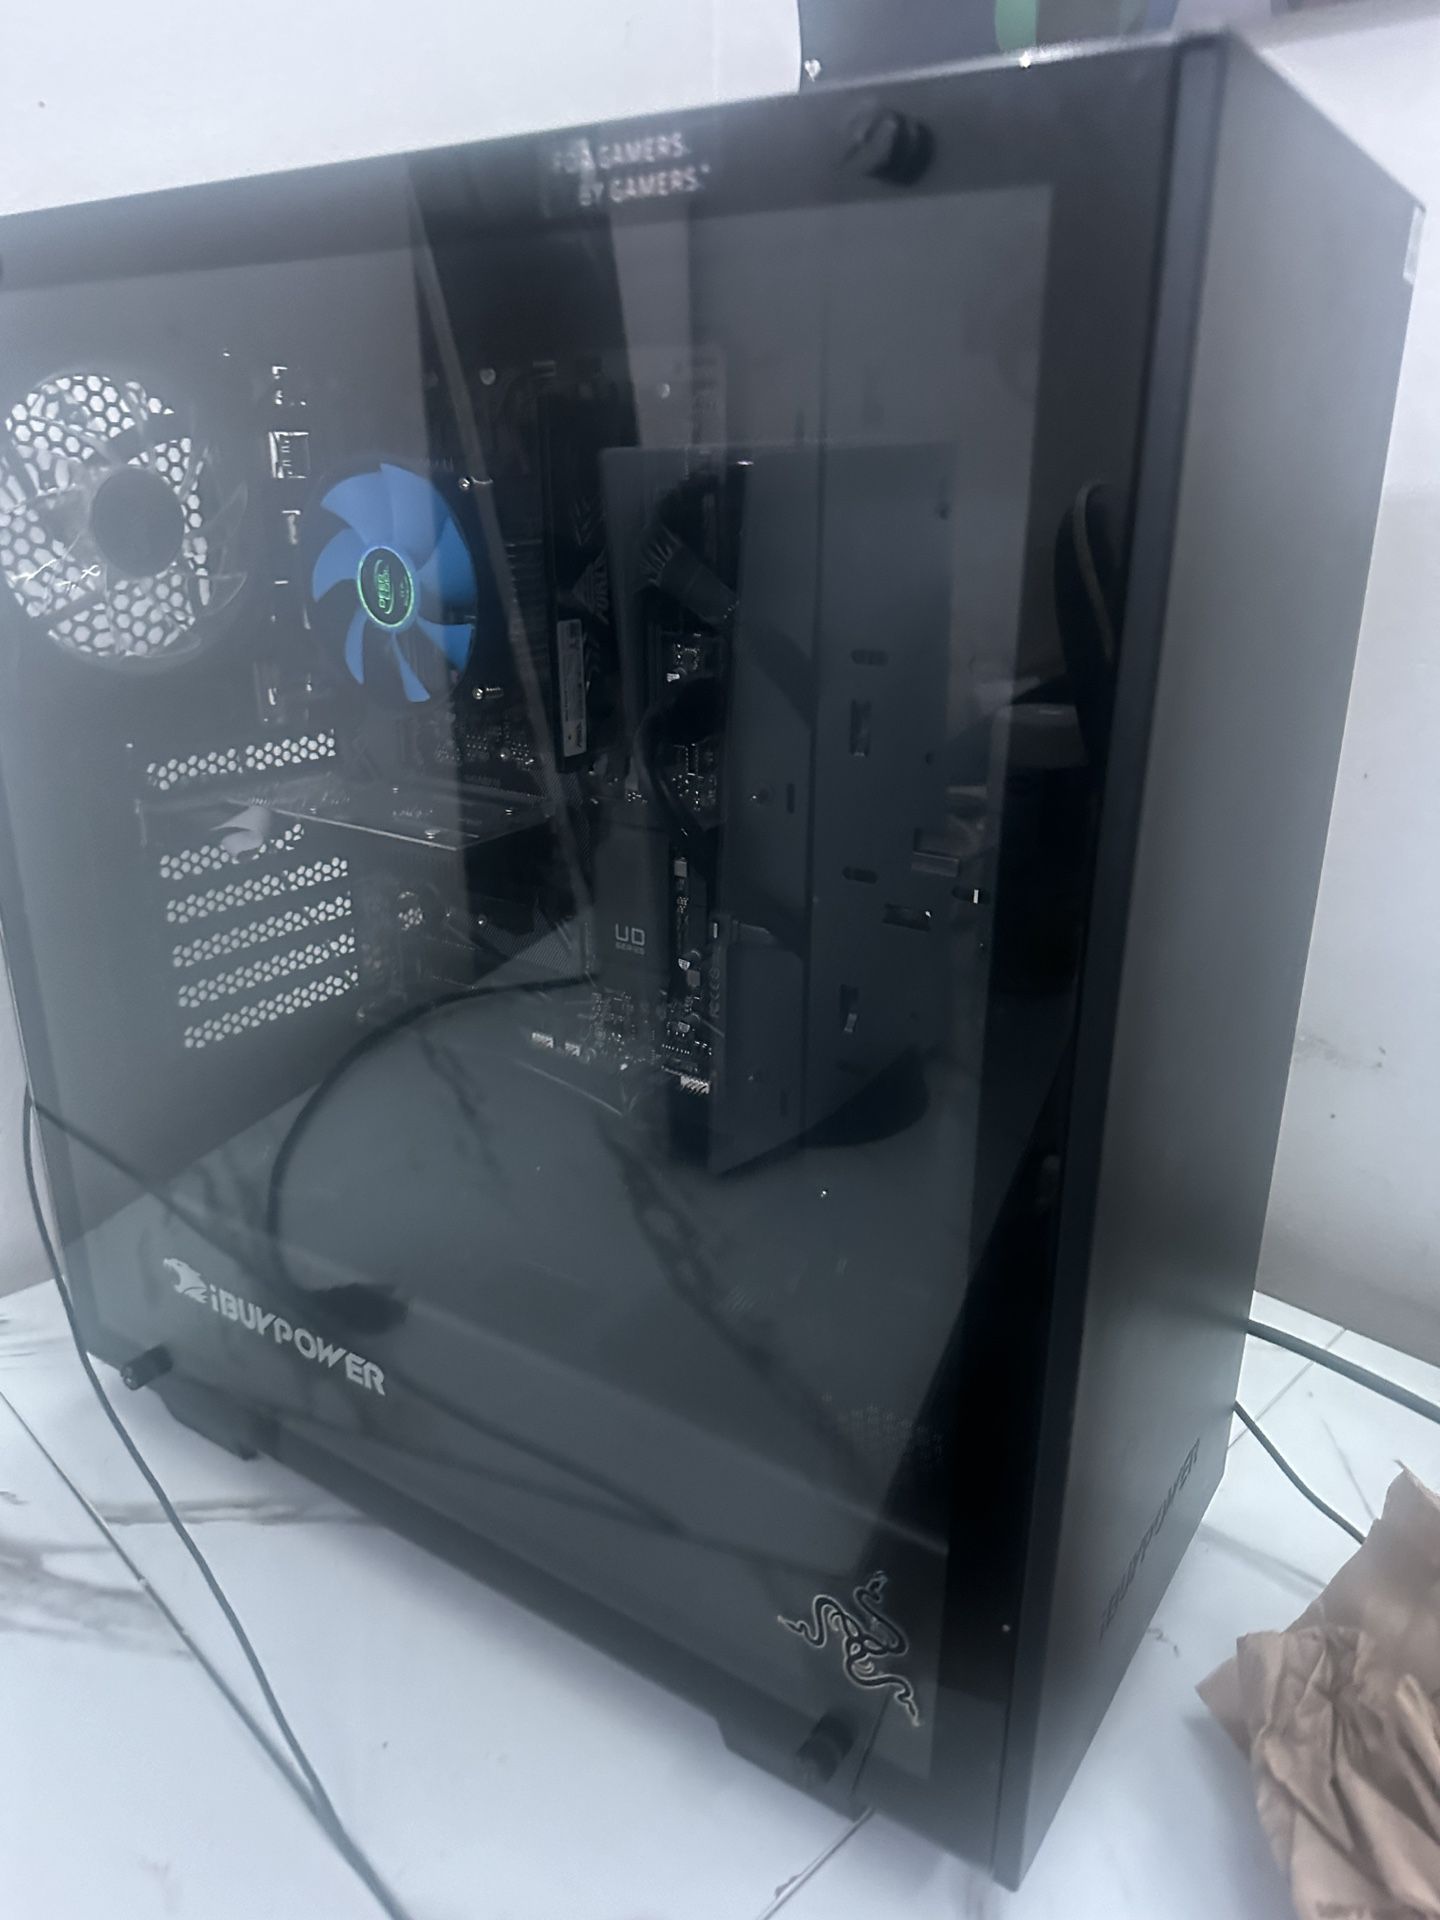 IBUYPOWER PC for sale NEED GONE ASAP WILL NEGOTIATE PRICES 